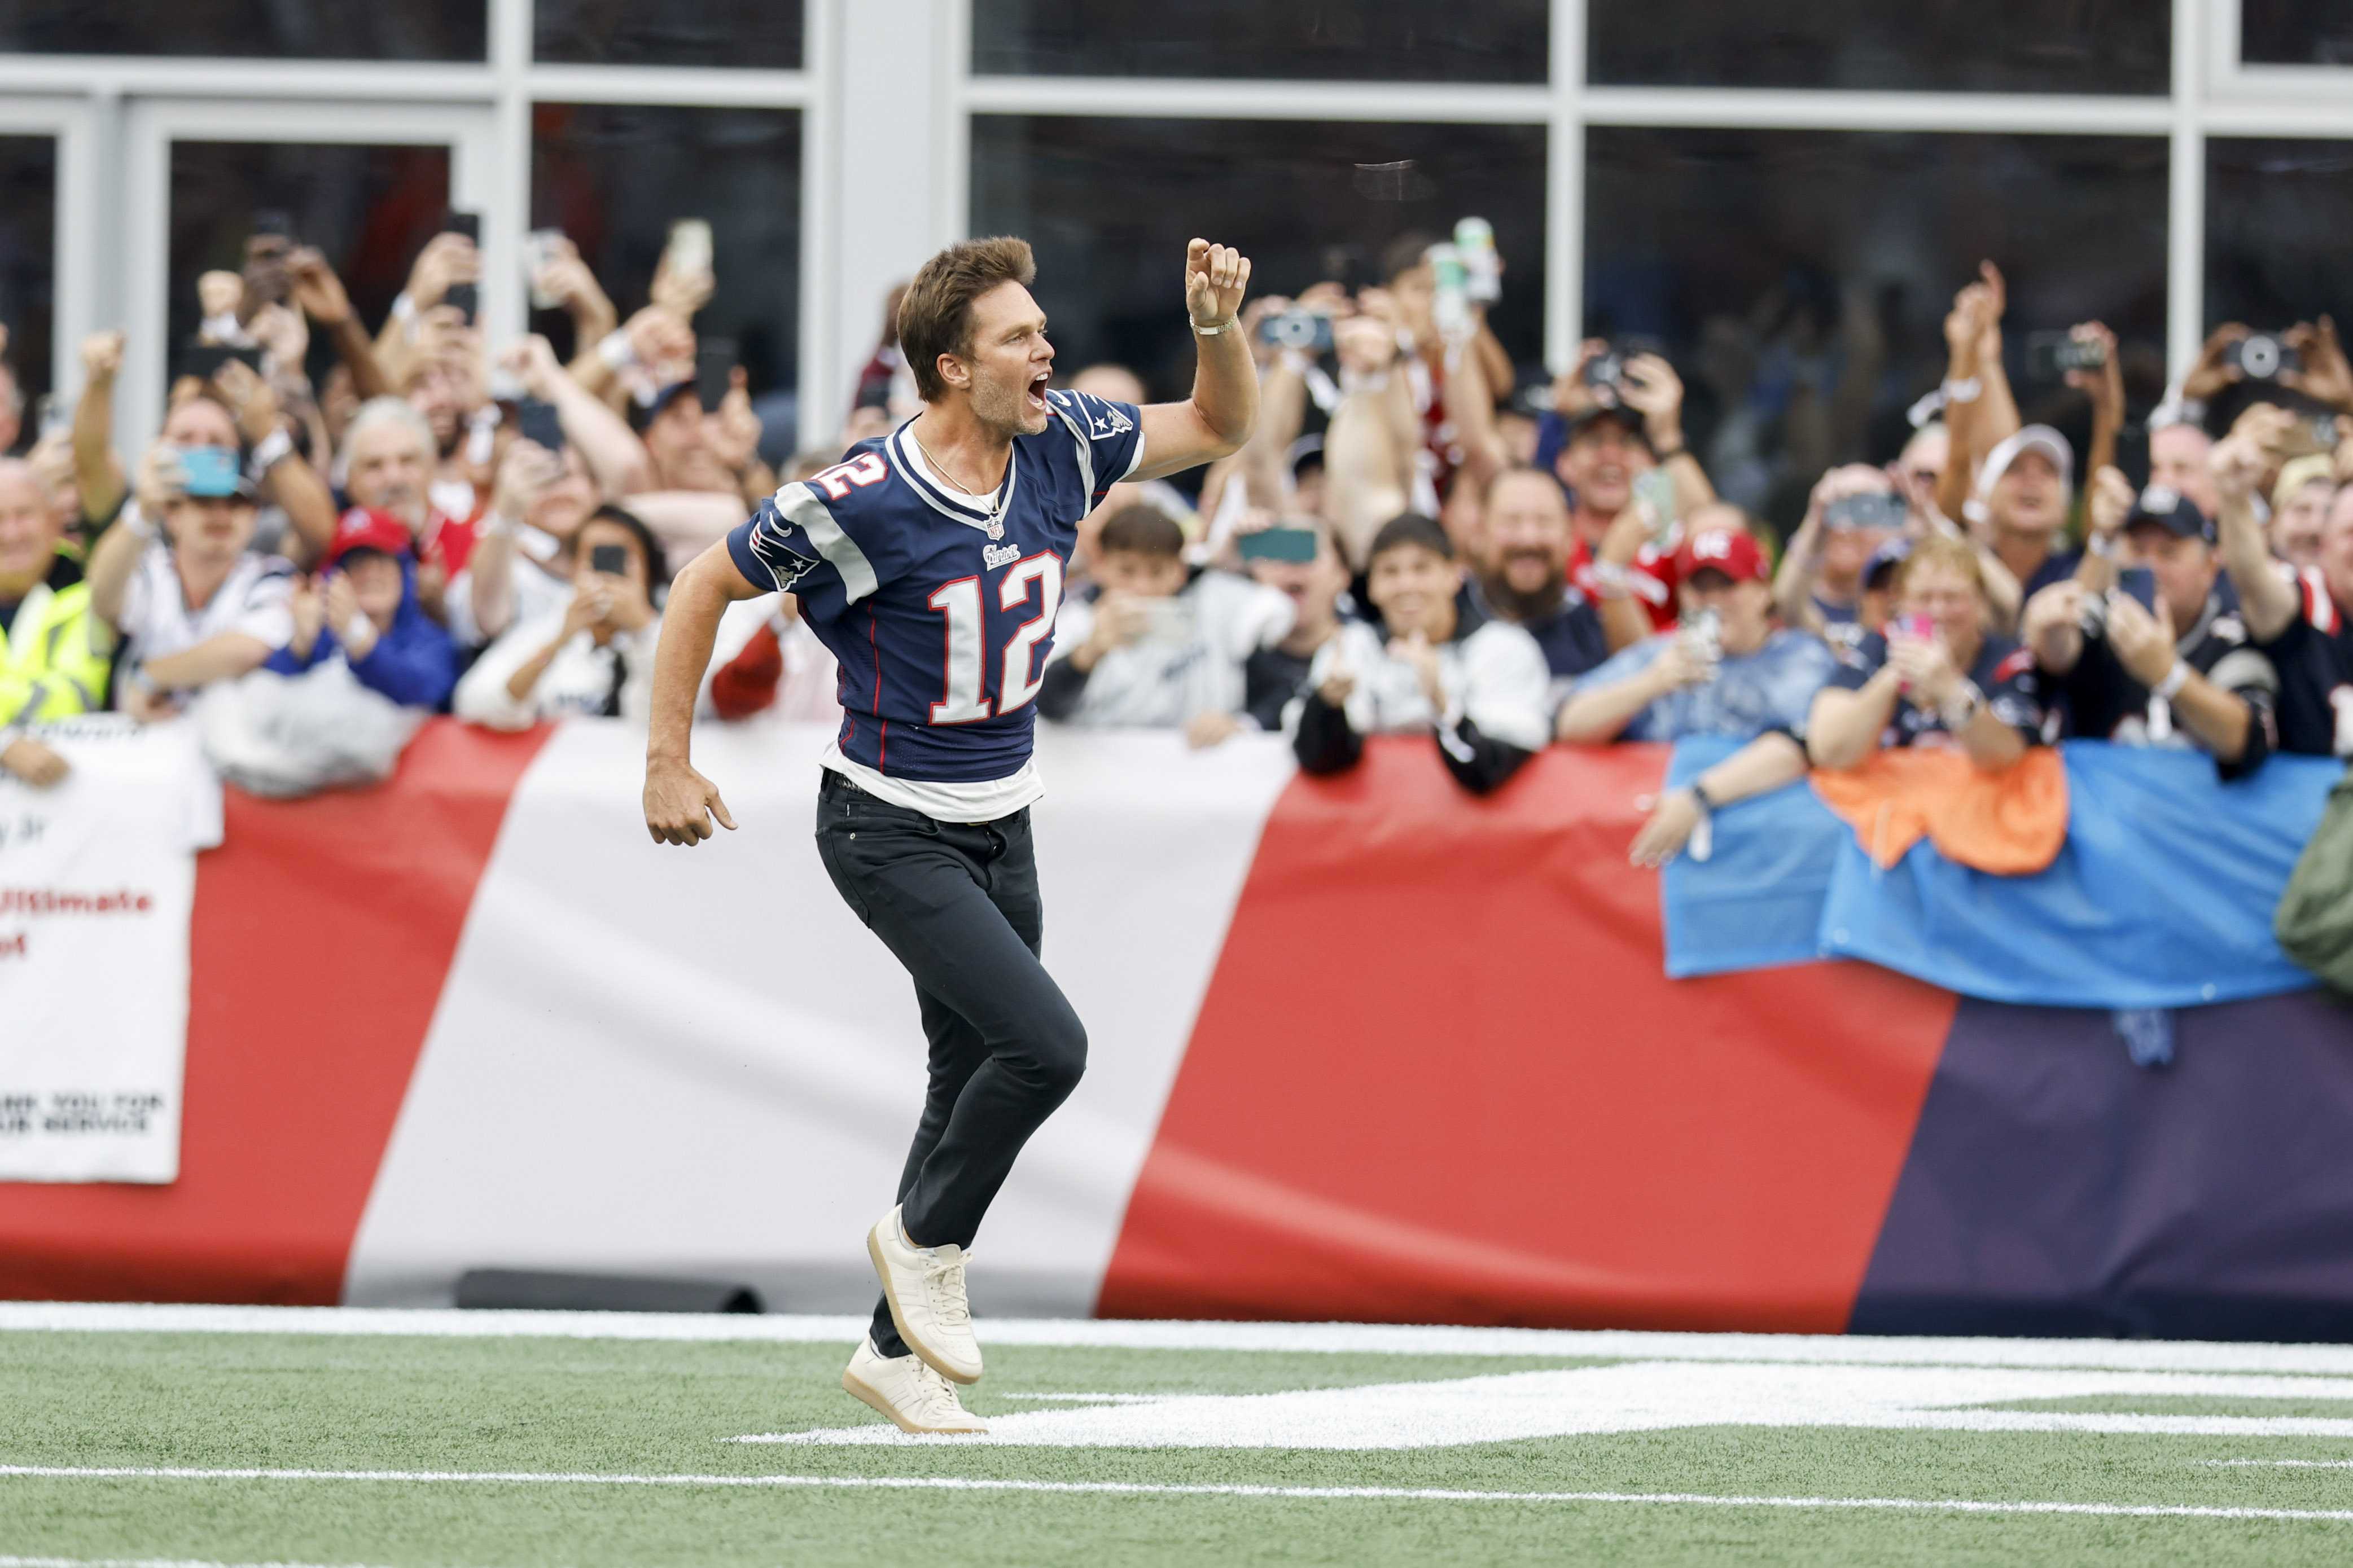 Patriots fans honor Brady at halftime during home opener